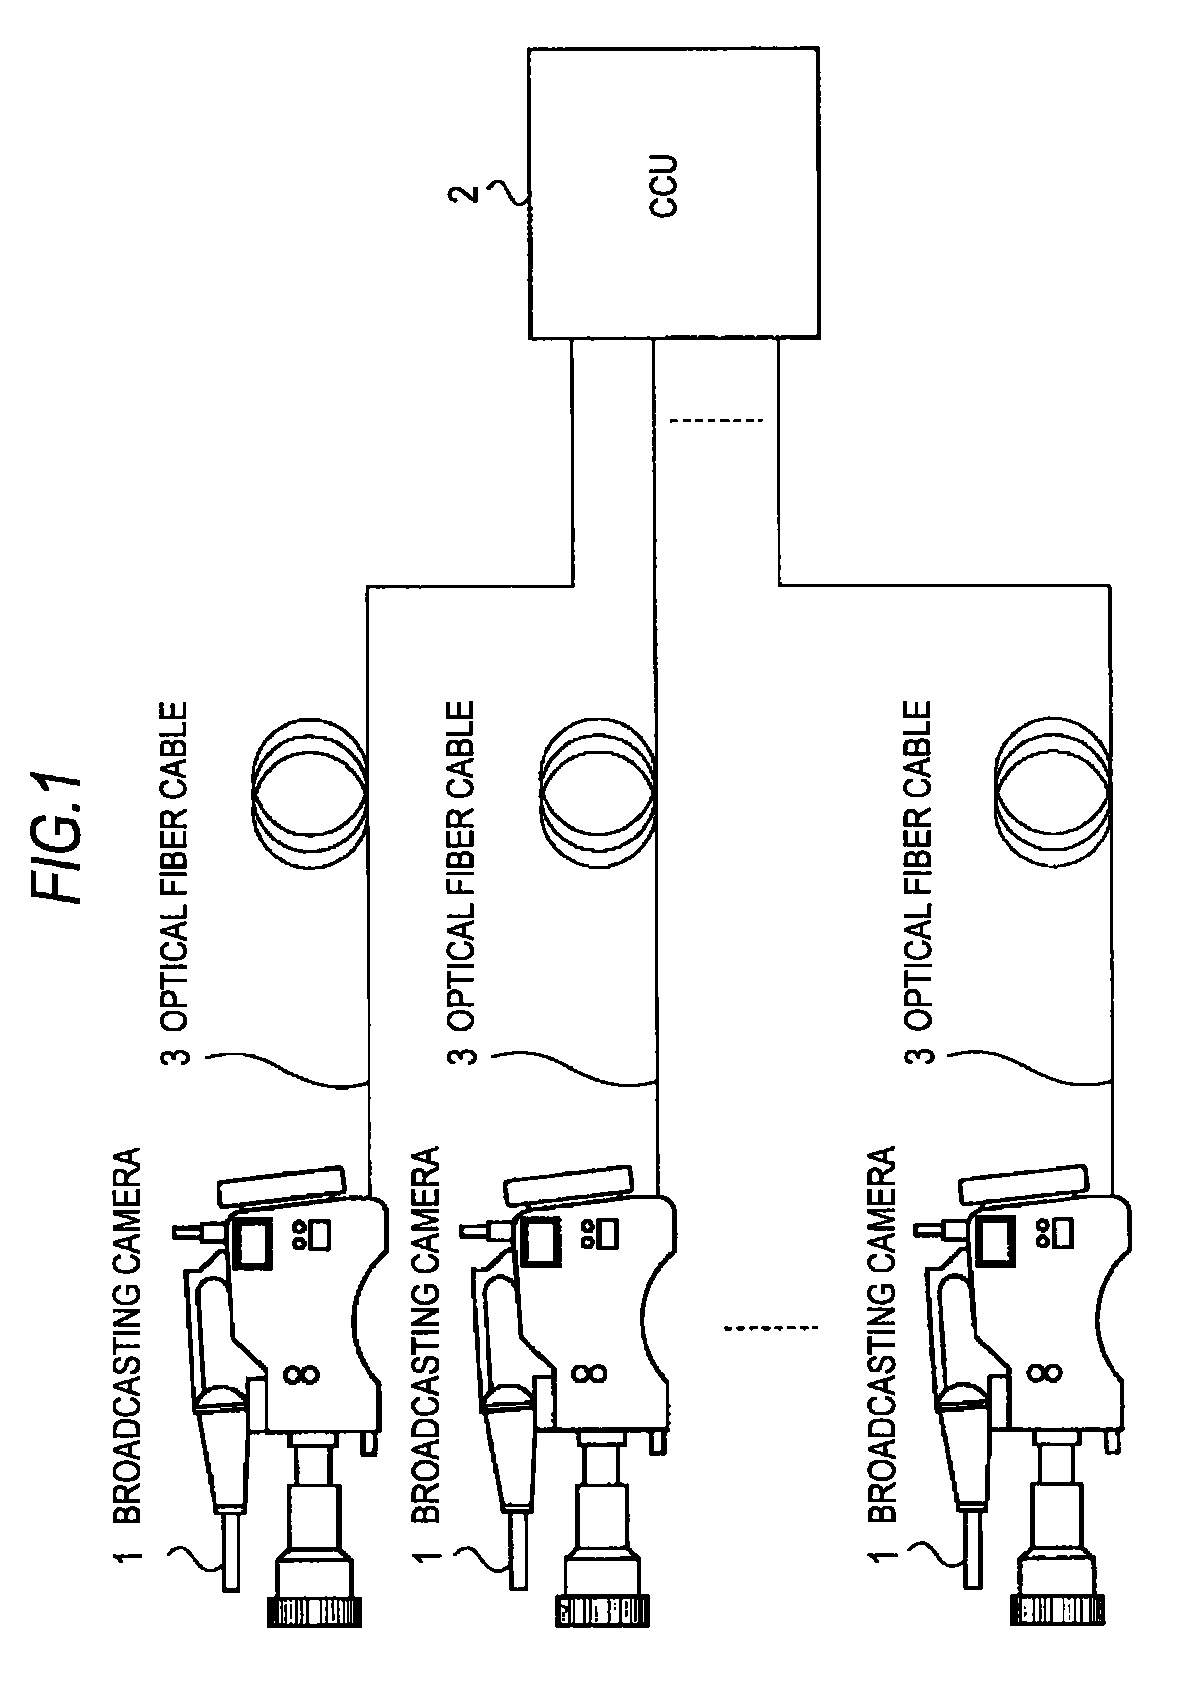 Signal transmitting and receiving devices, systems, and method for multiplexing parallel data in a horizontal auxiliary data space